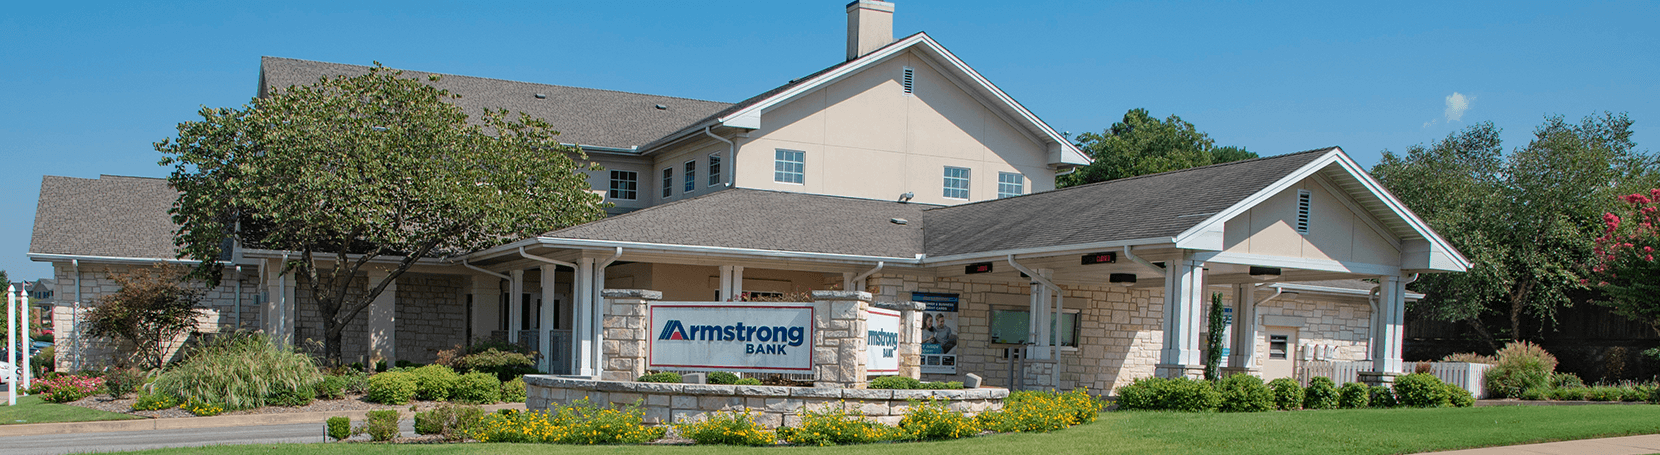 Armstrong Bank in Fort Smith AR, Phoenix Ave | Since 1909